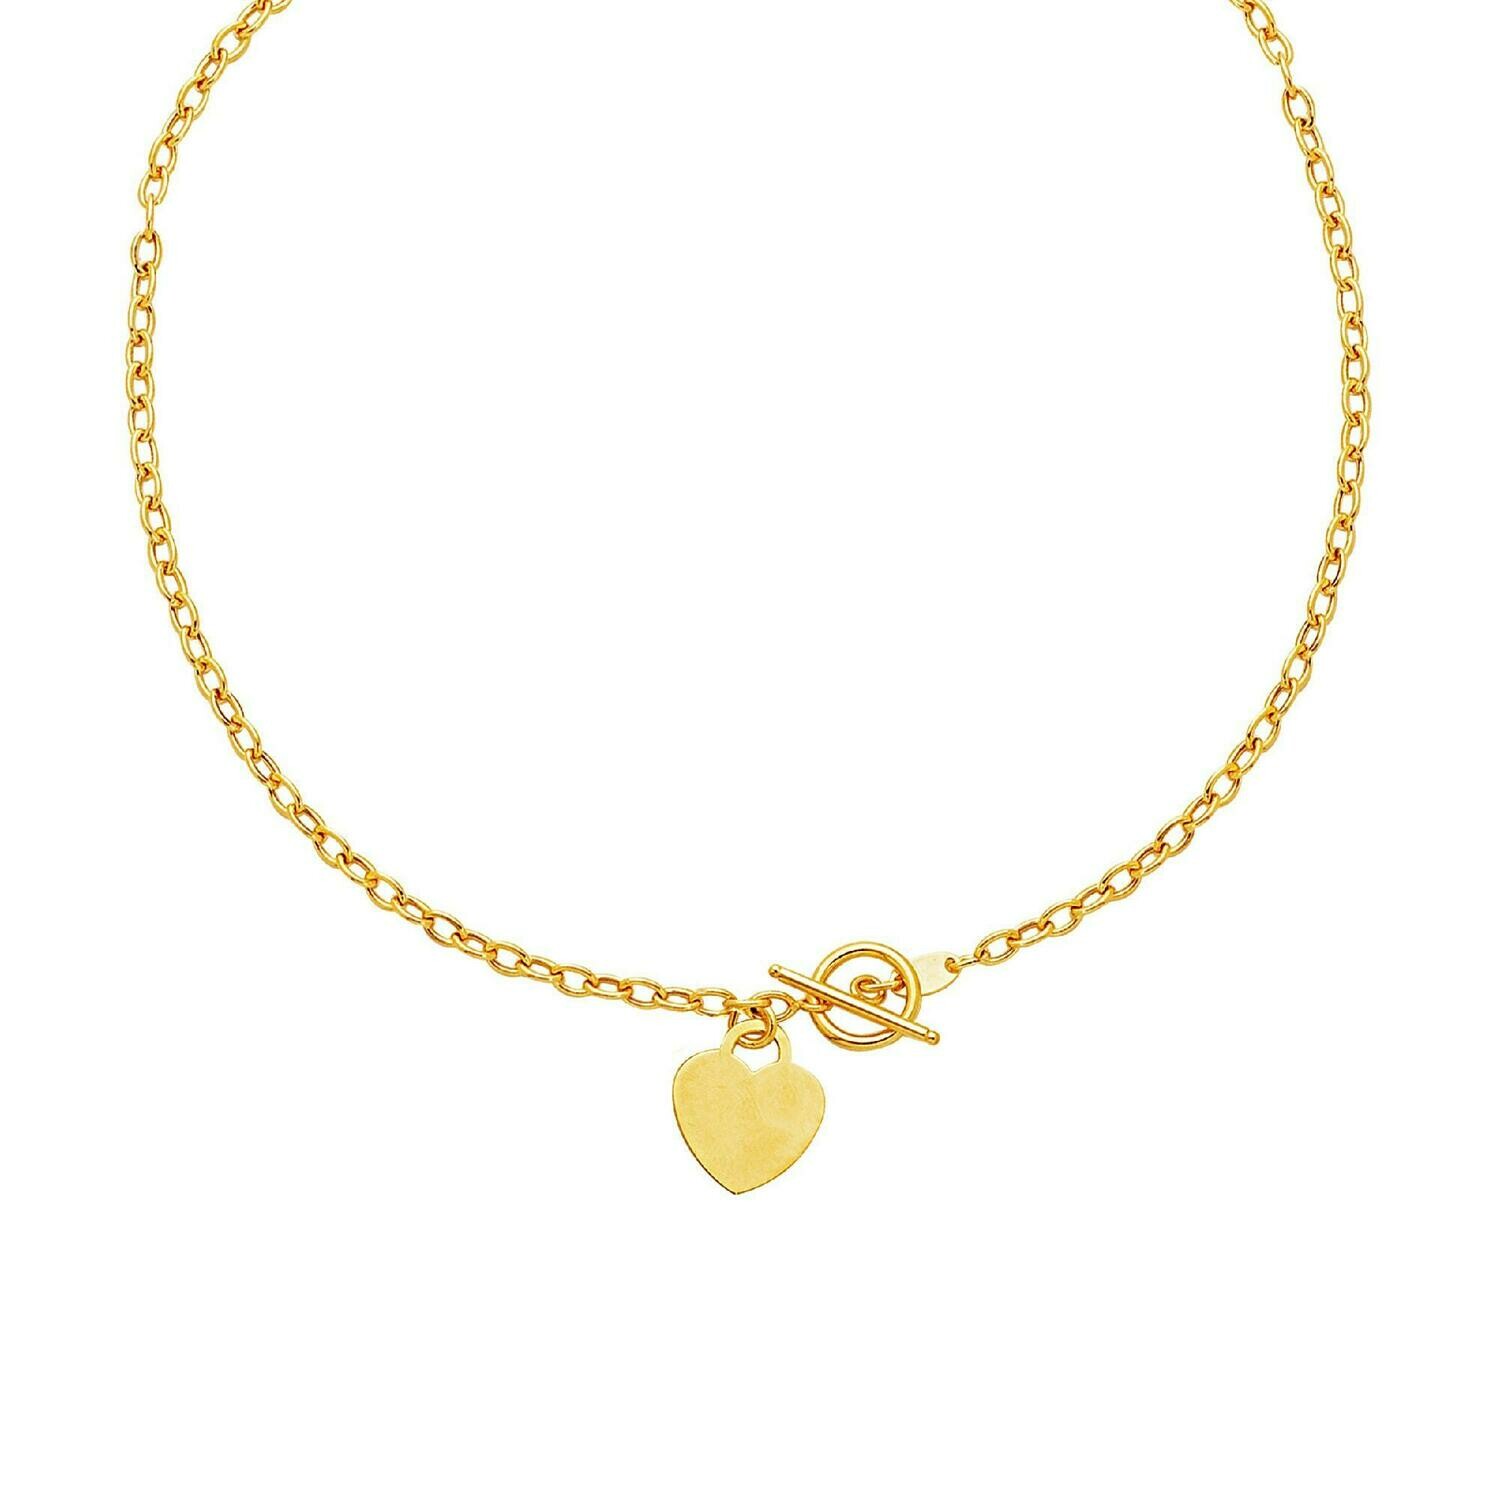 Toggle Necklace with Heart Charm in 14k Yellow Gold, Size: 17&quot;